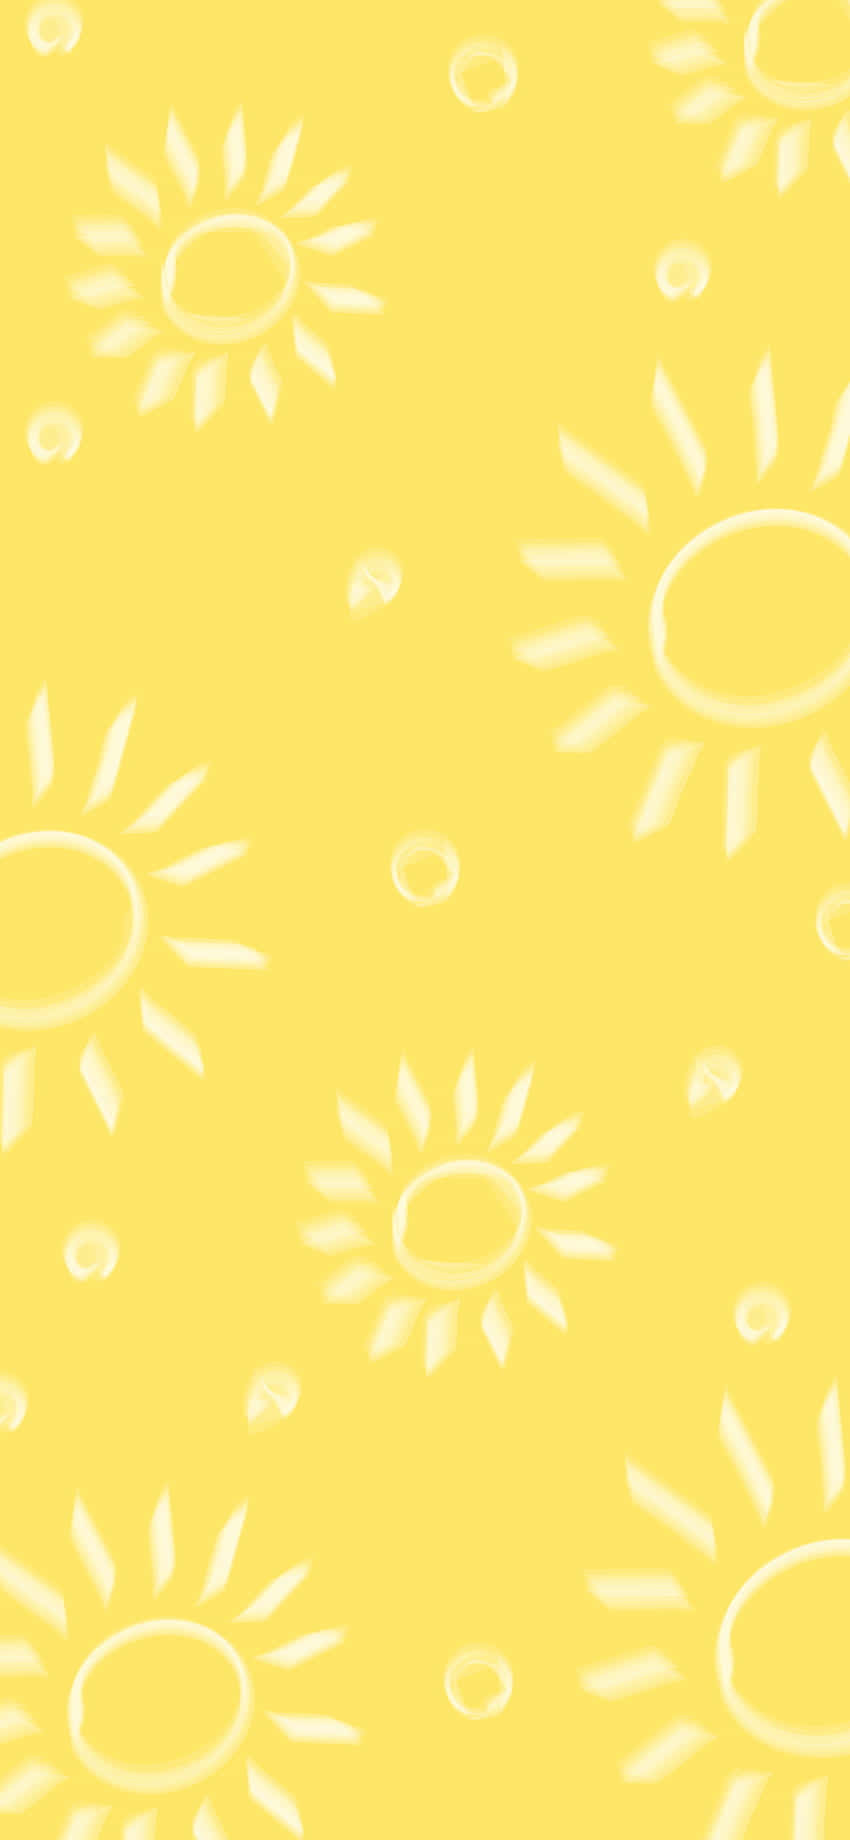 Brighten Your Day with this Cute Sun! Wallpaper